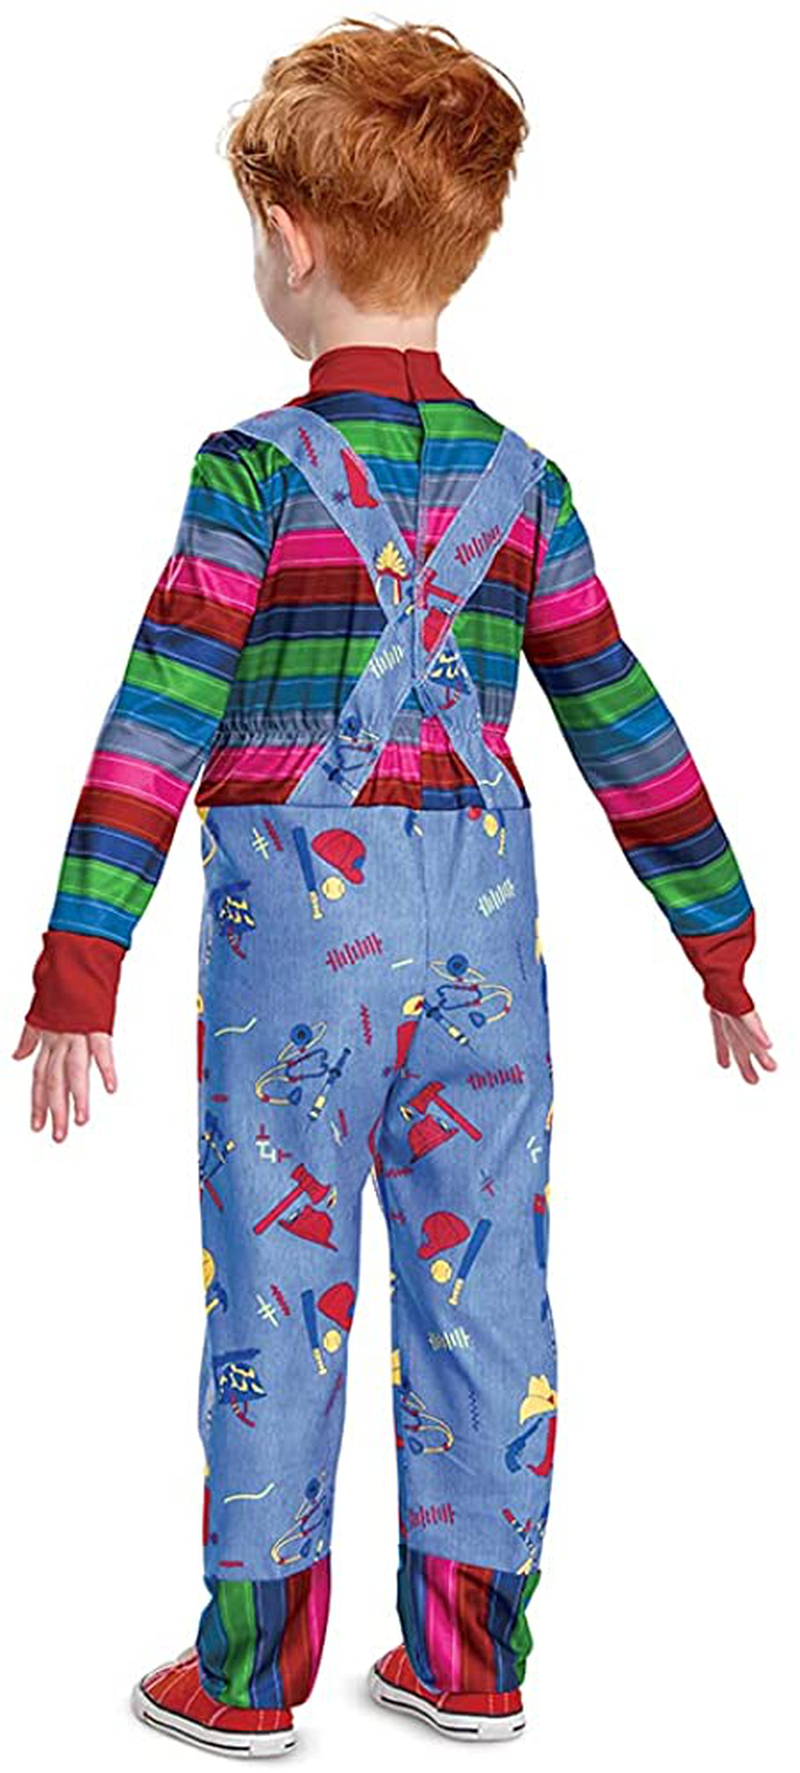 Chucky Costume for Kids, Official Childs Play Chucky Costume Jumpsuit Outfit, Classic Toddler Size